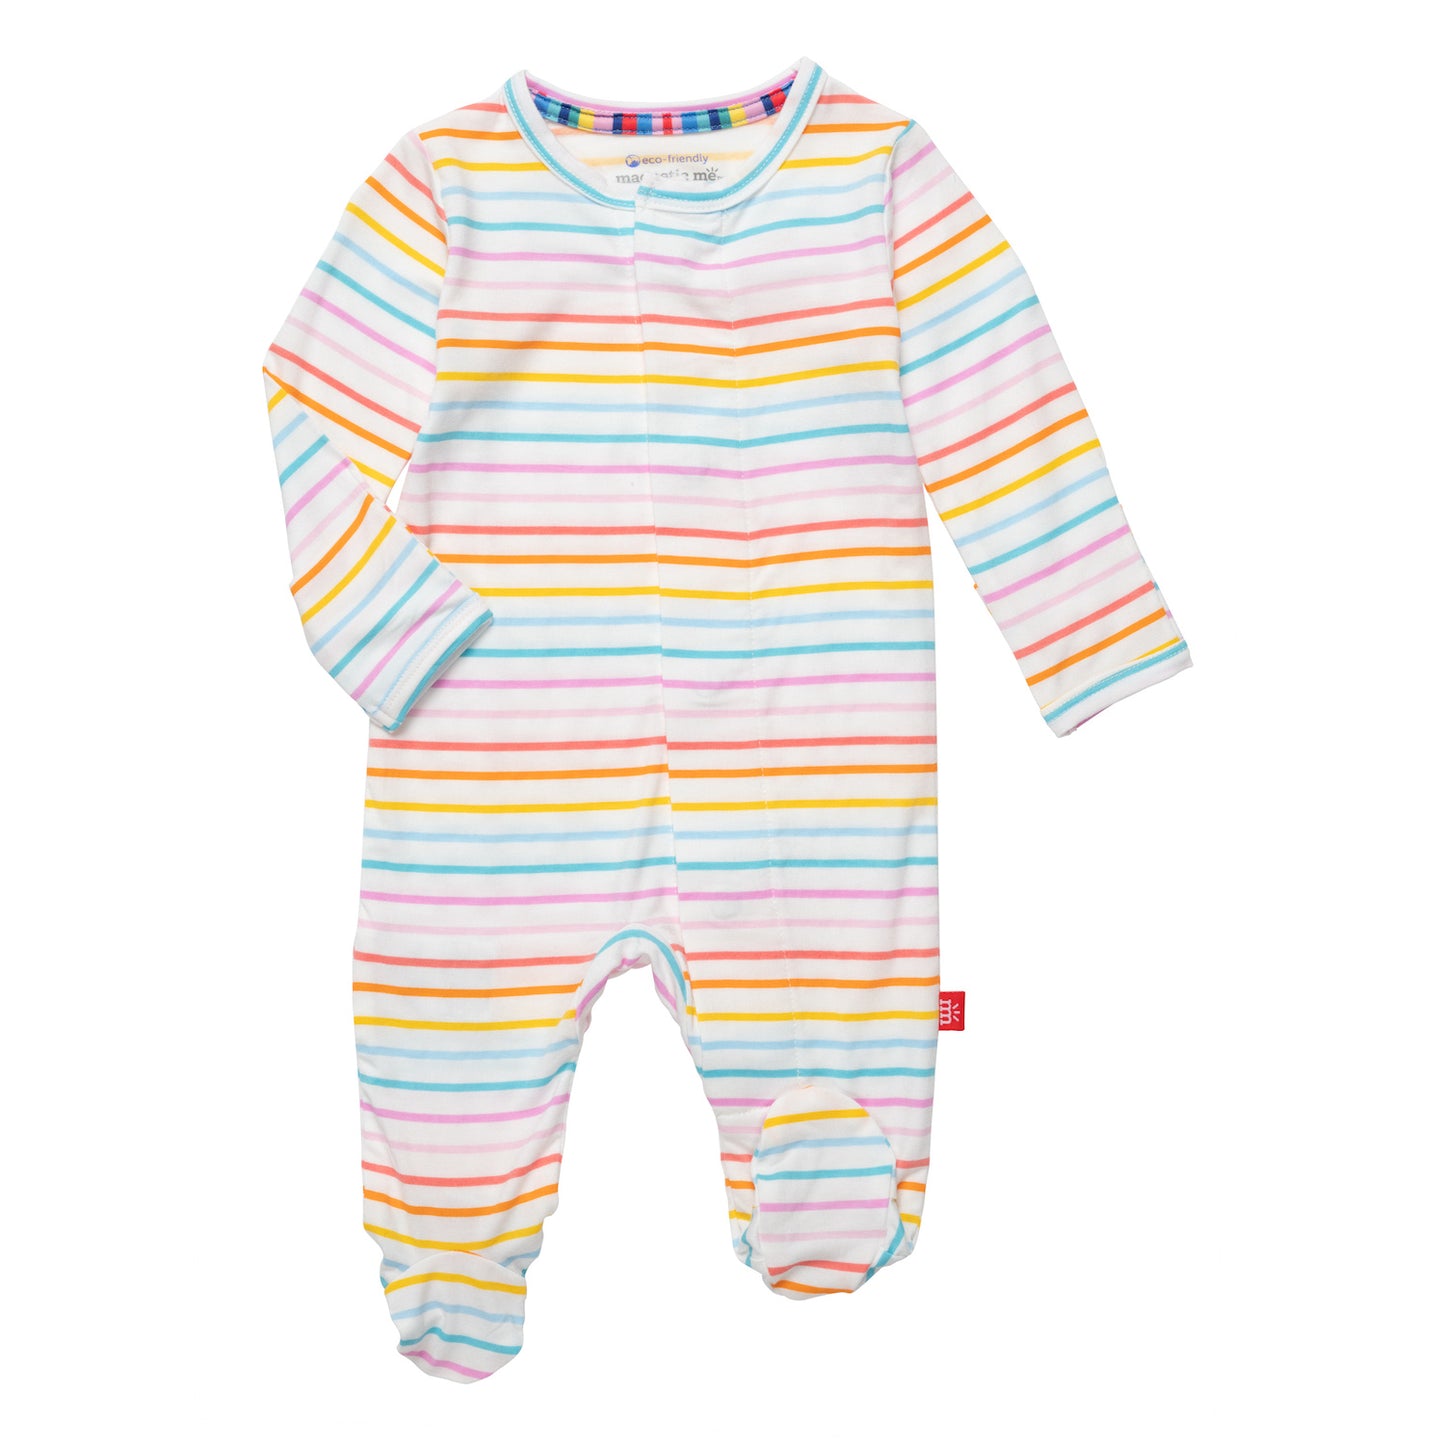 Magnetic Me Modal Magnetic Footie - Candy Stripe